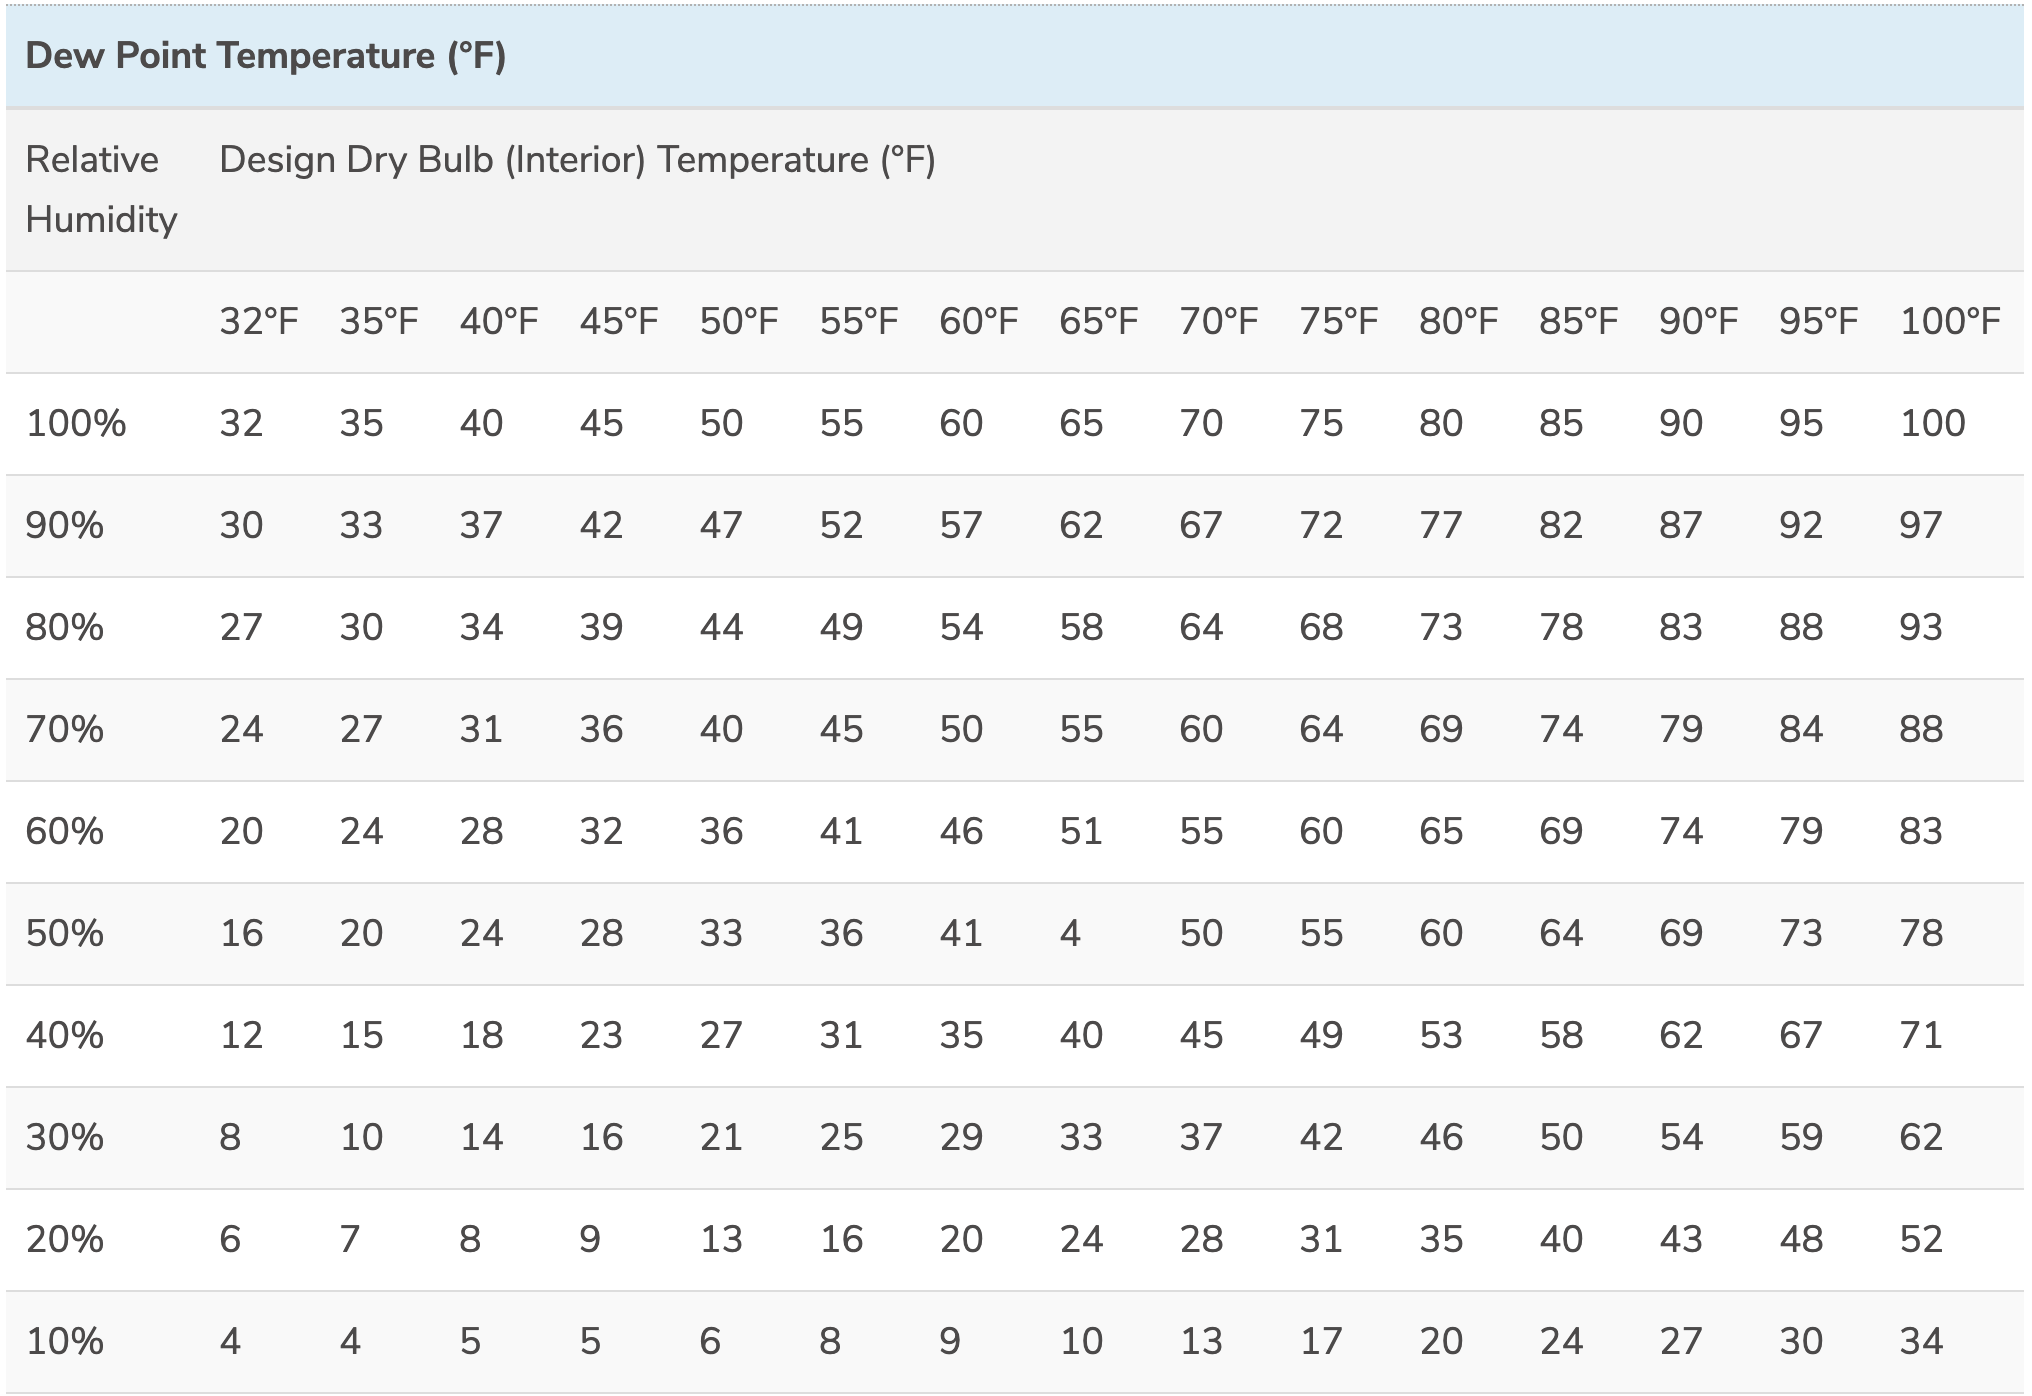 Dew Point Temperatures for Selected Air Temperature and Relative Humidity